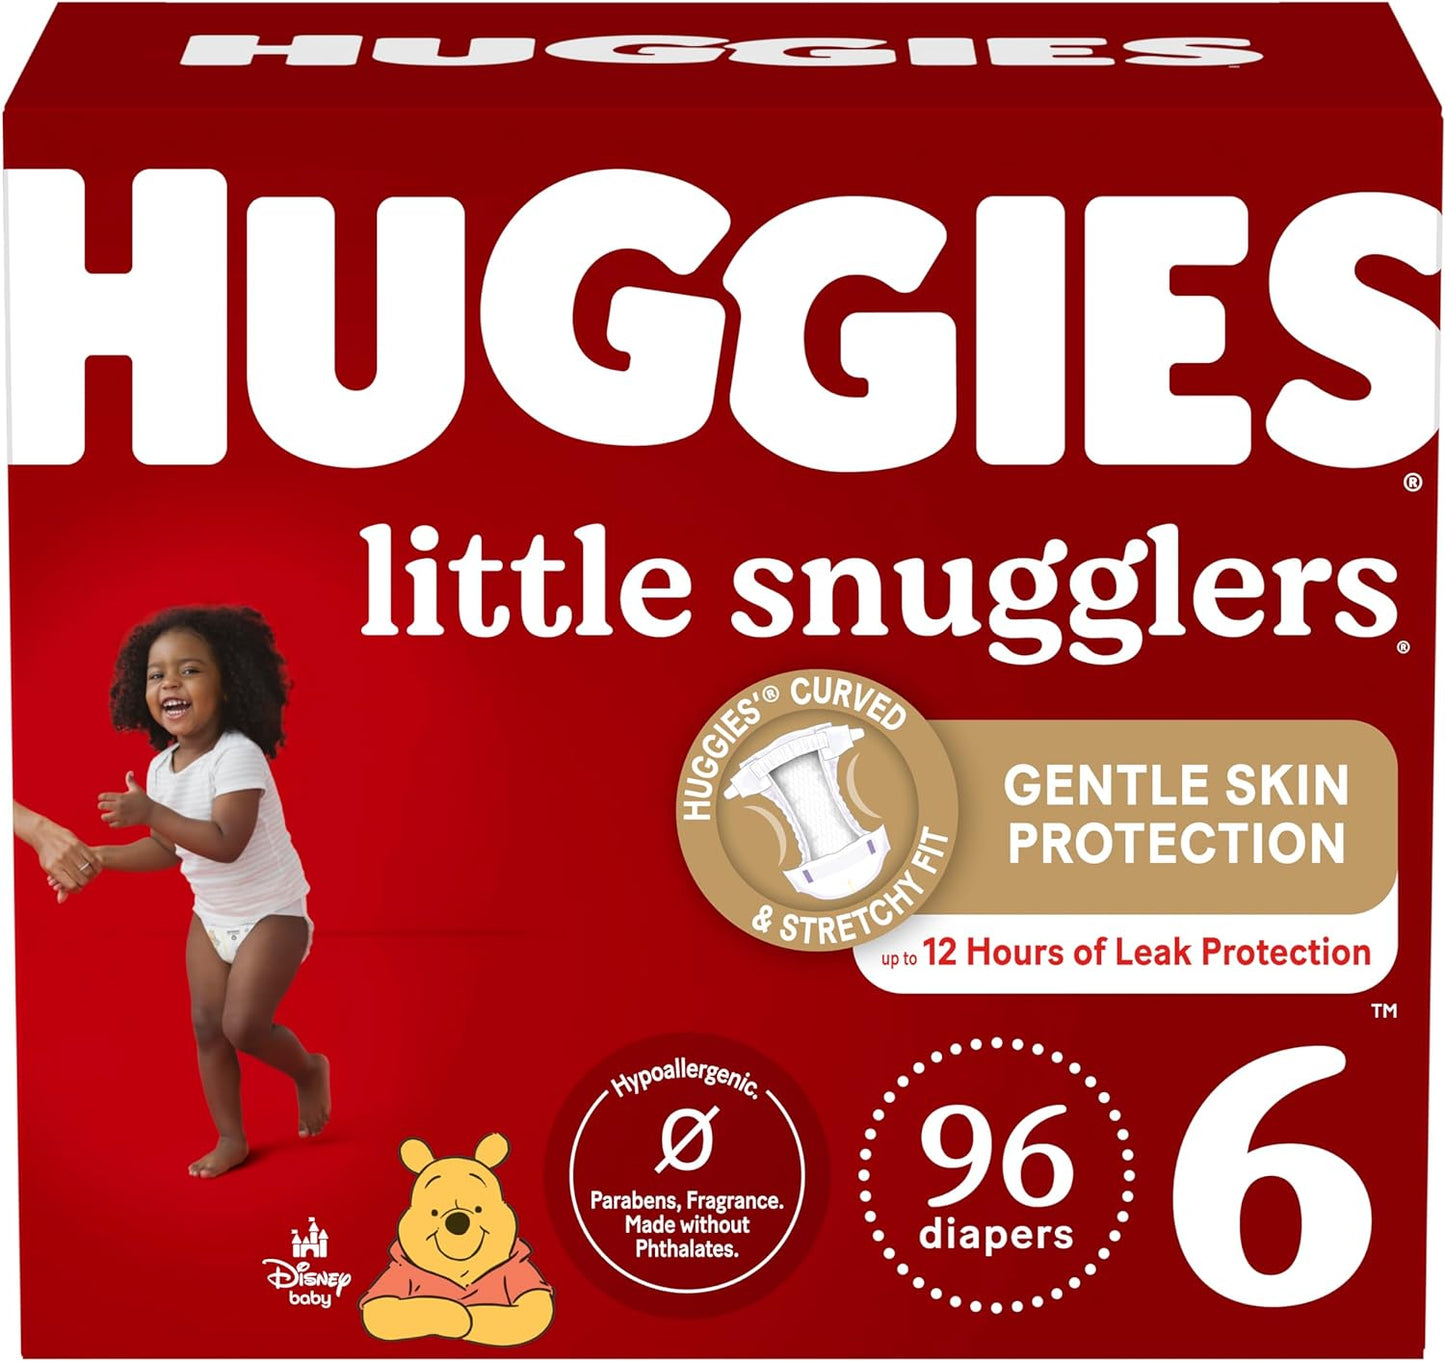 Huggies Newborn Diapers, Little Snugglers Baby Diapers, Size Newborn (up to 10 lbs), 128 Count